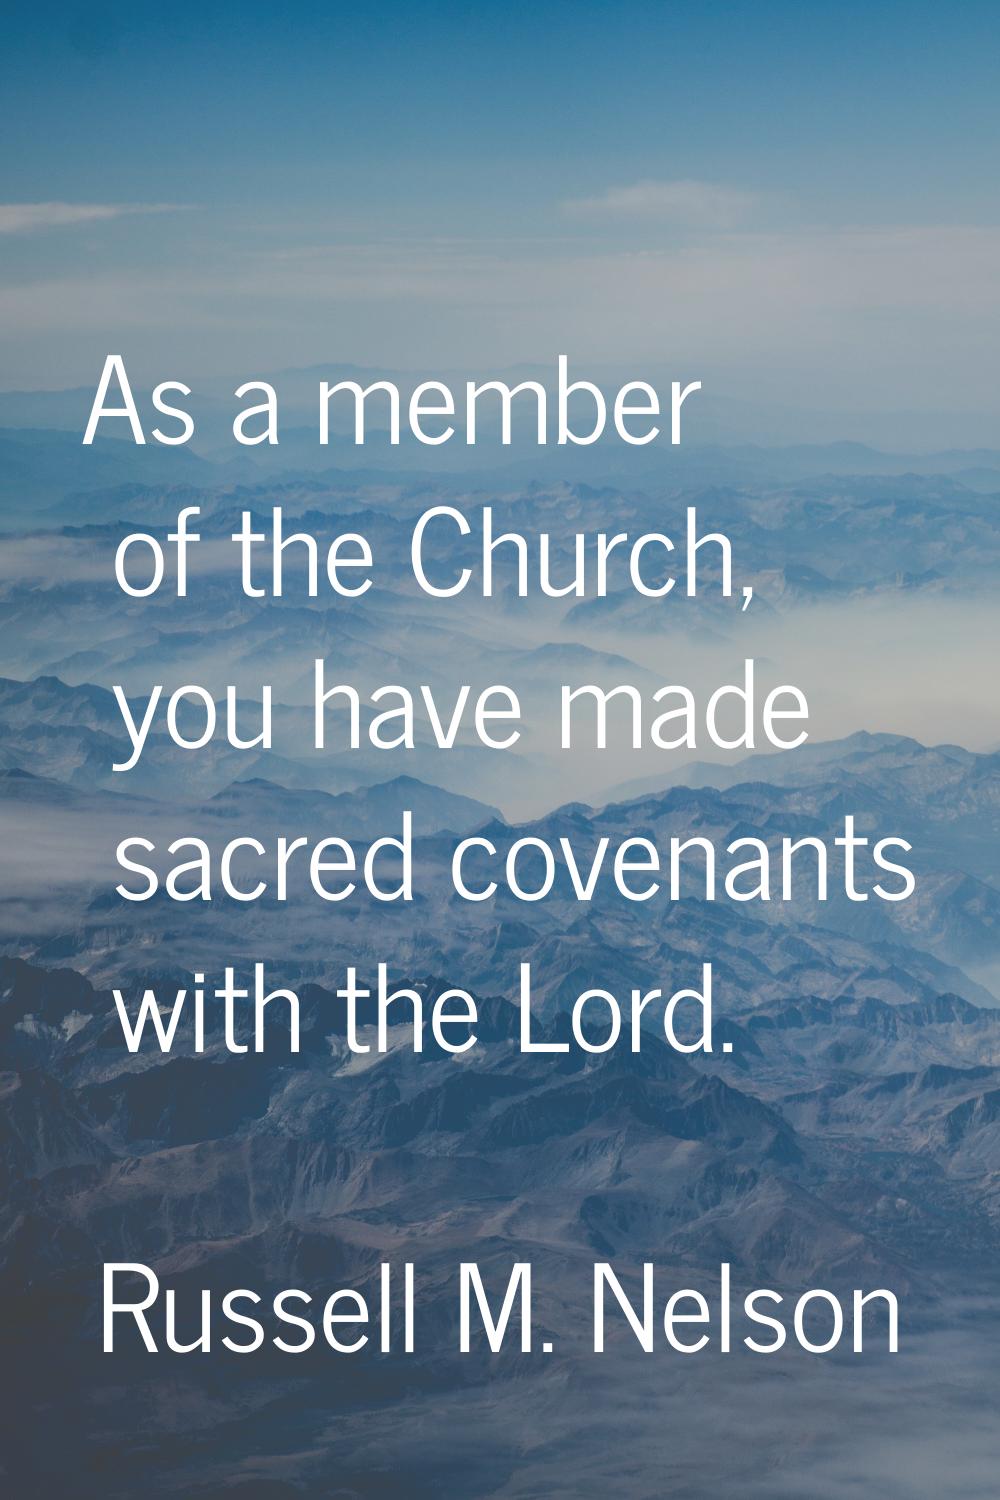 As a member of the Church, you have made sacred covenants with the Lord.